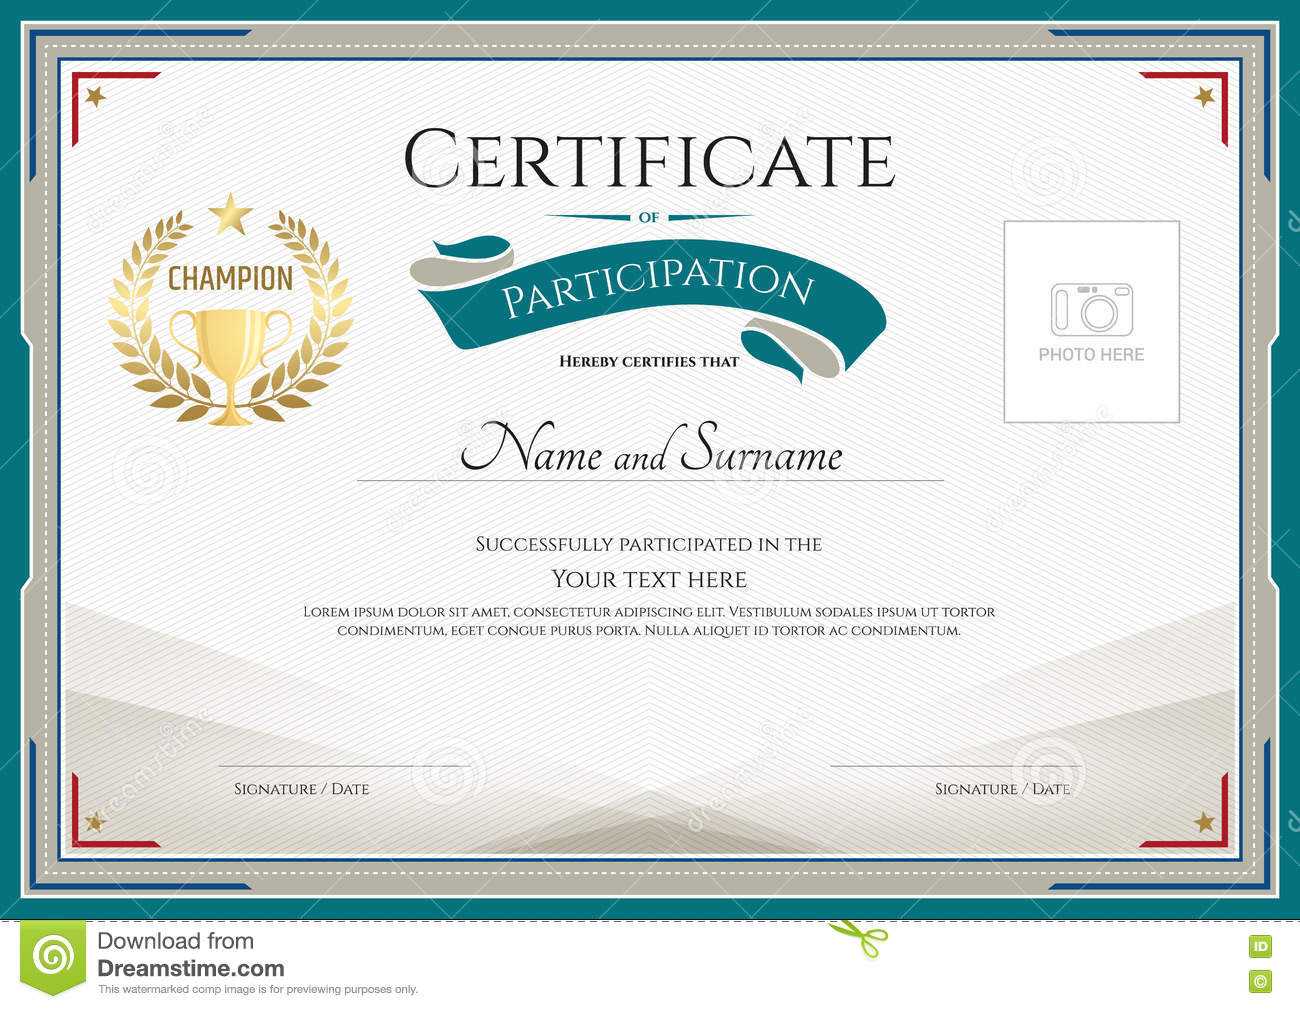 Certificate Of Participation Template With Green Broder For Certificate Of Participation Word Template